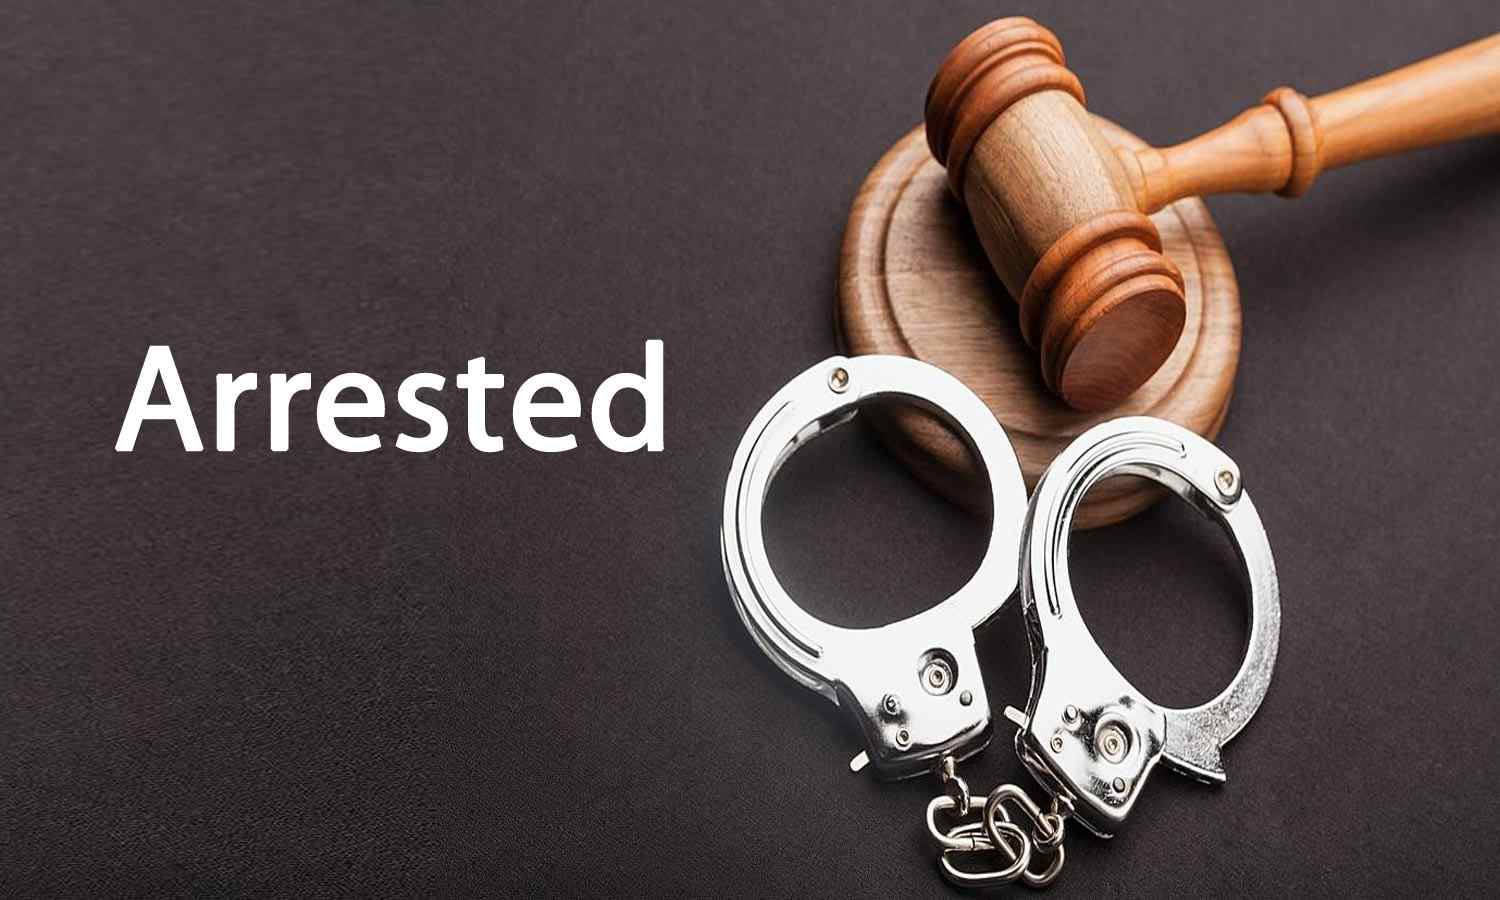 Imposter examinees arrested